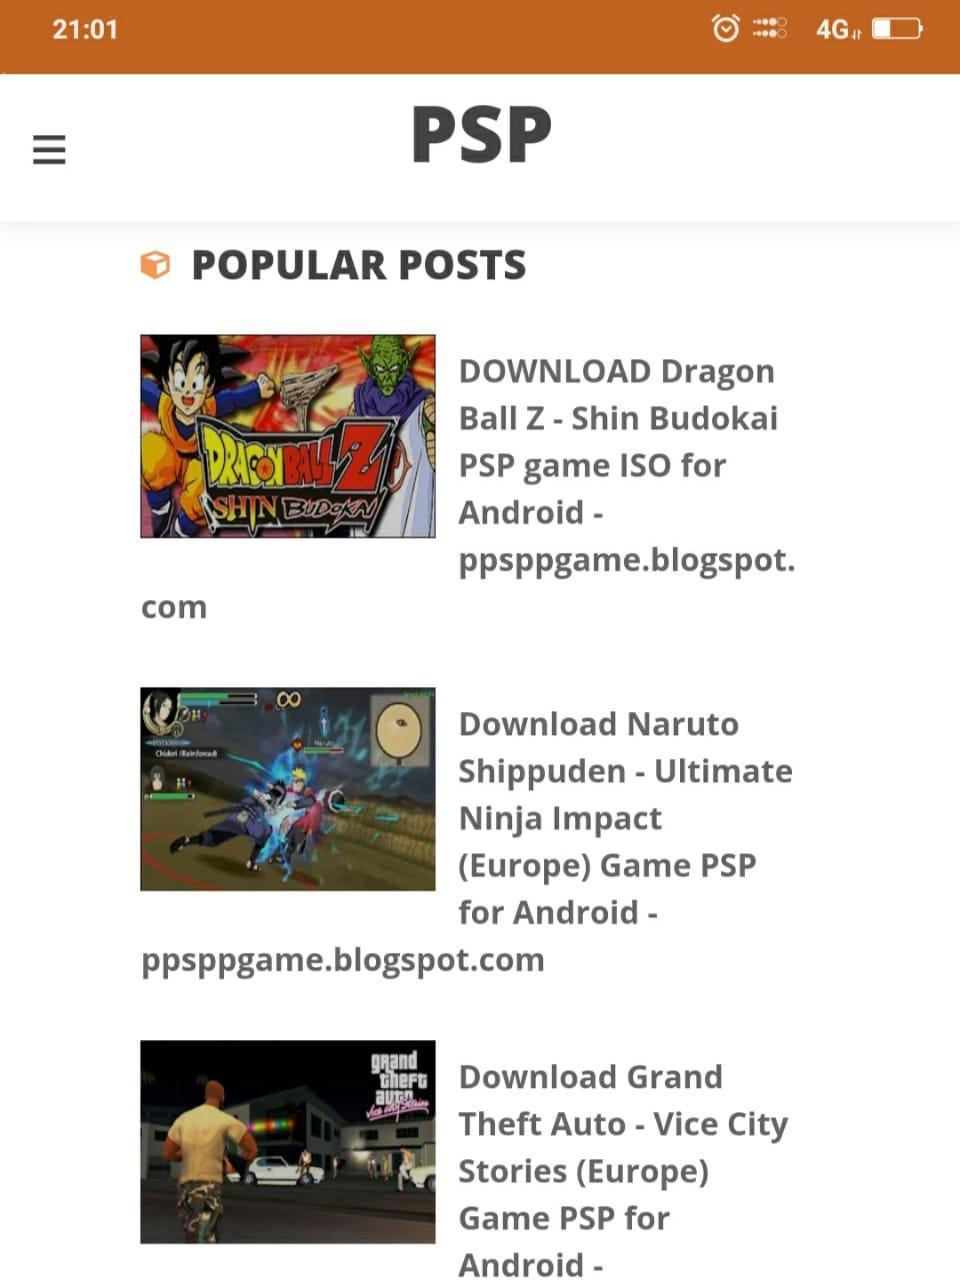 Download All Psp Games And Ppsspp Emulators For Android Apk Download - freeware download roblox psp game